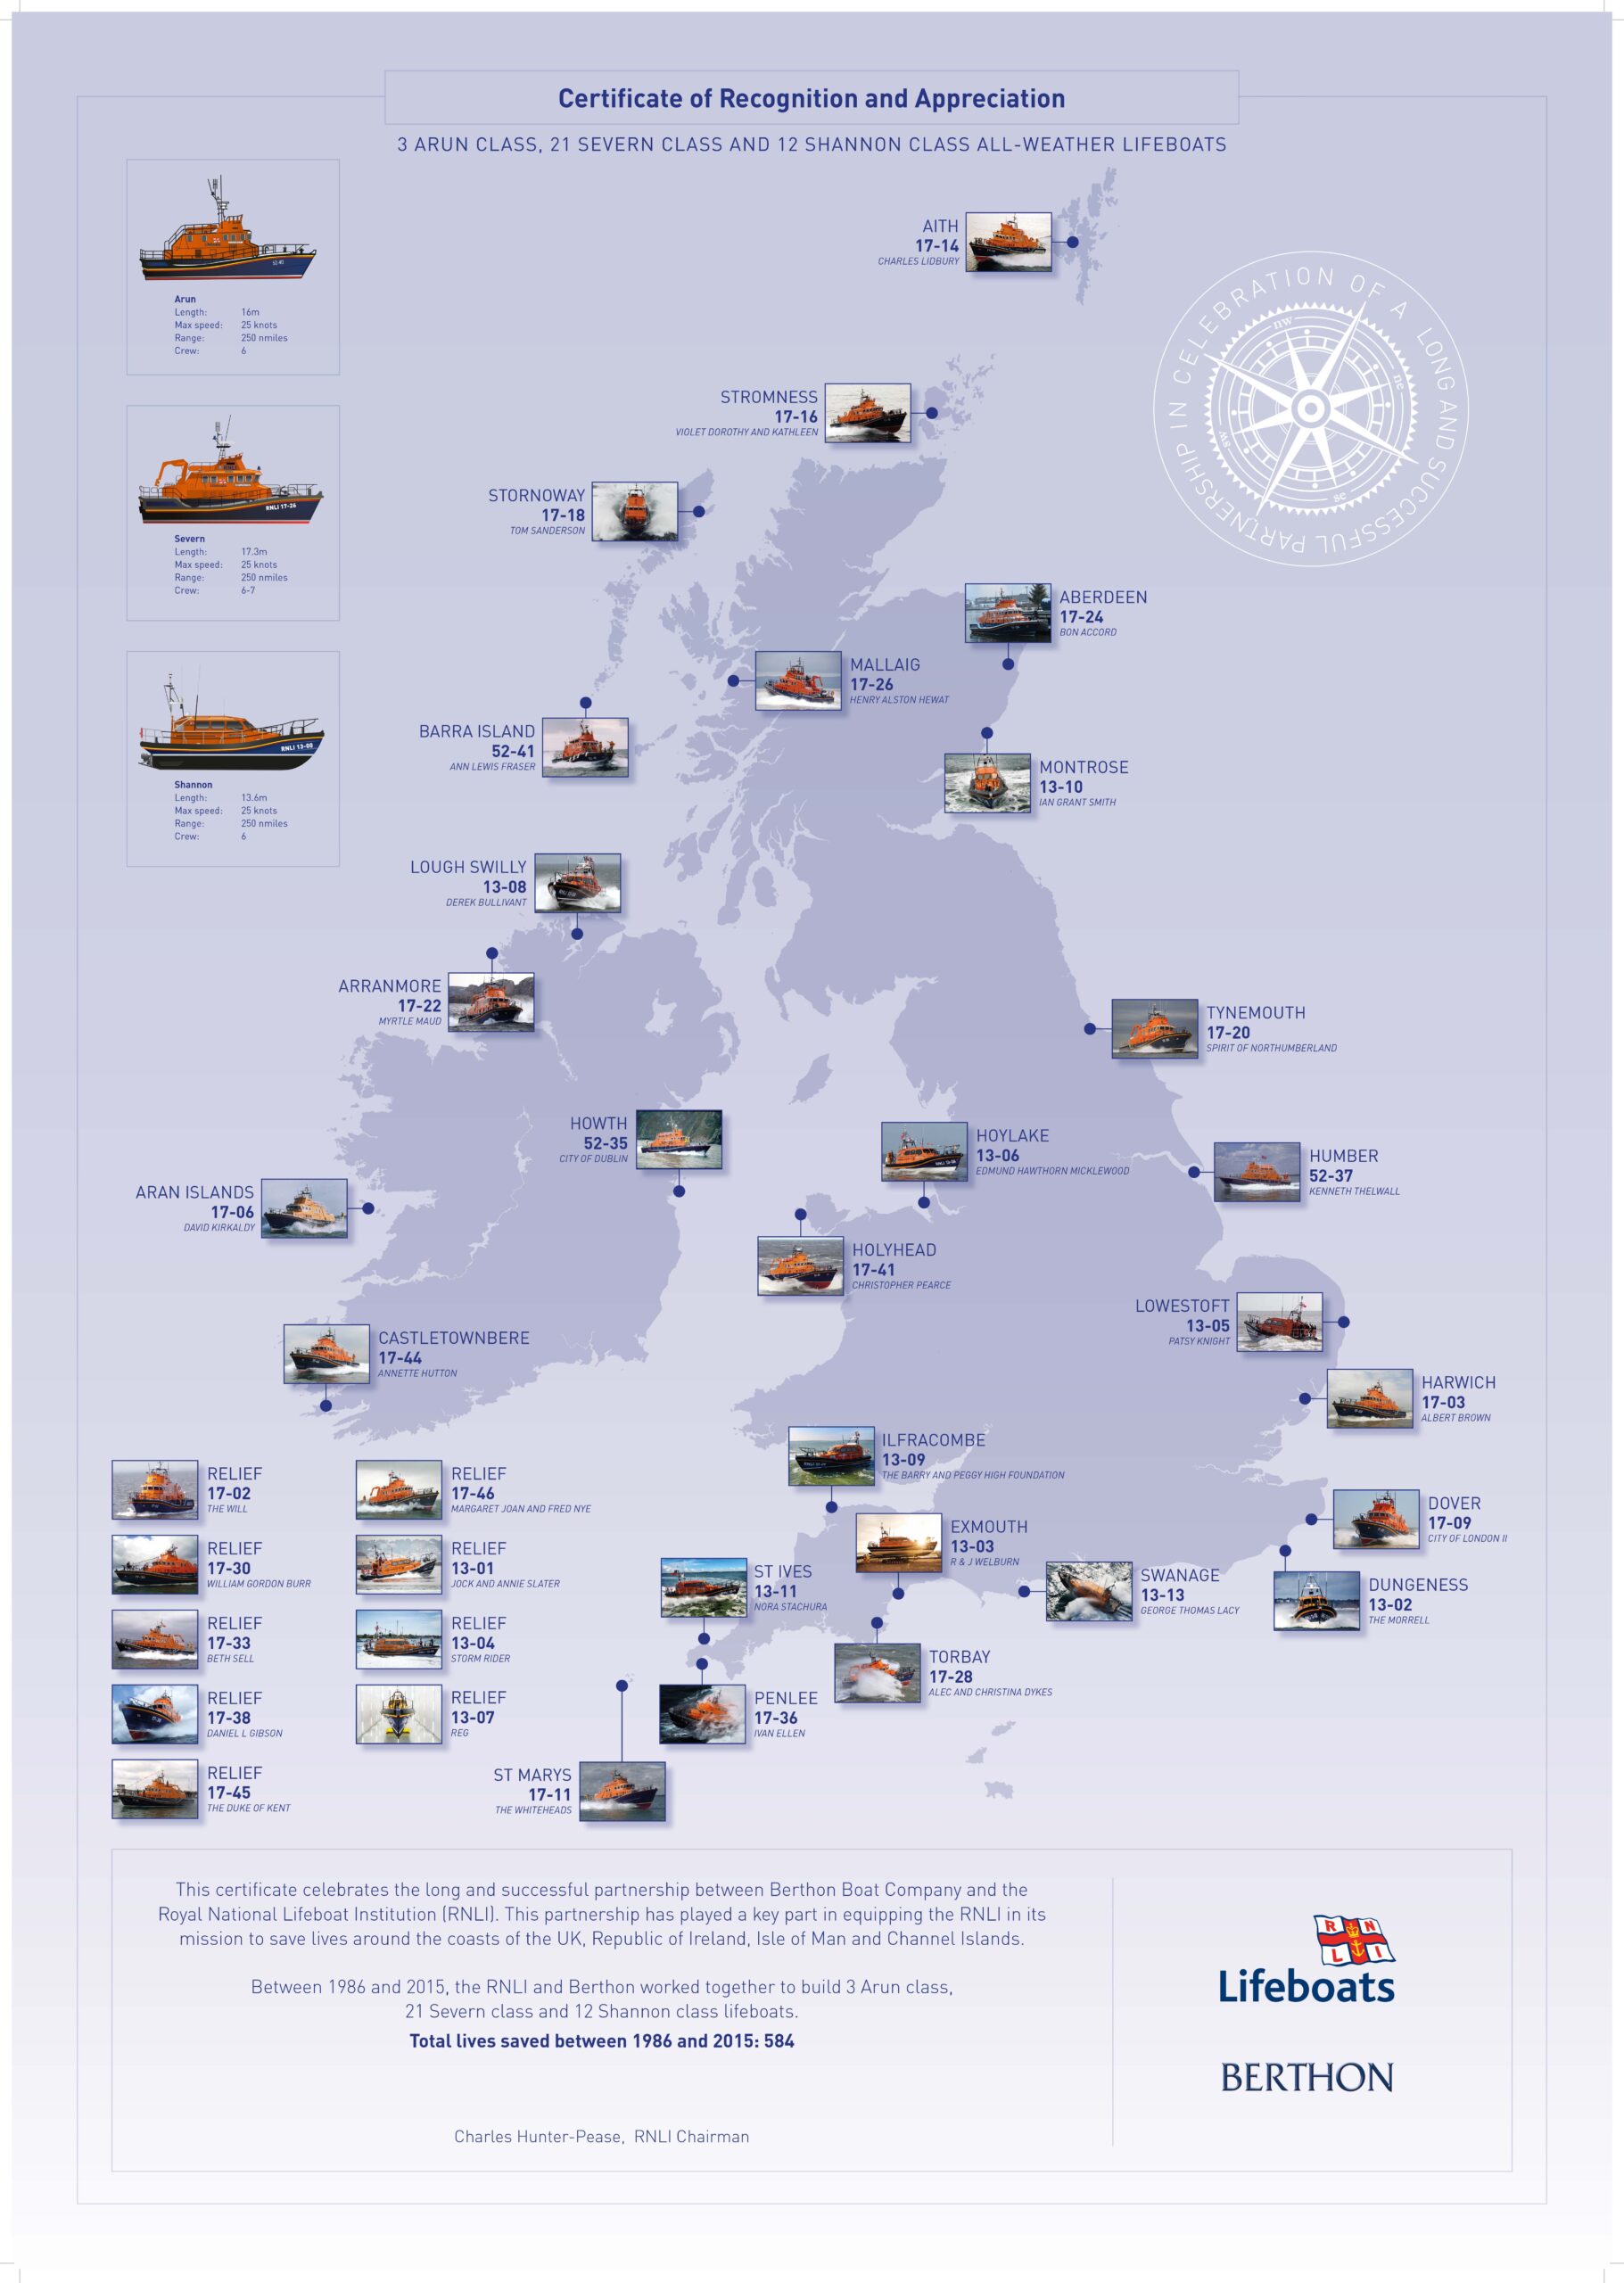 Map showing the Shannon, Severn, Aran Lifeboats built by Berthon Boat Co. for RNLI